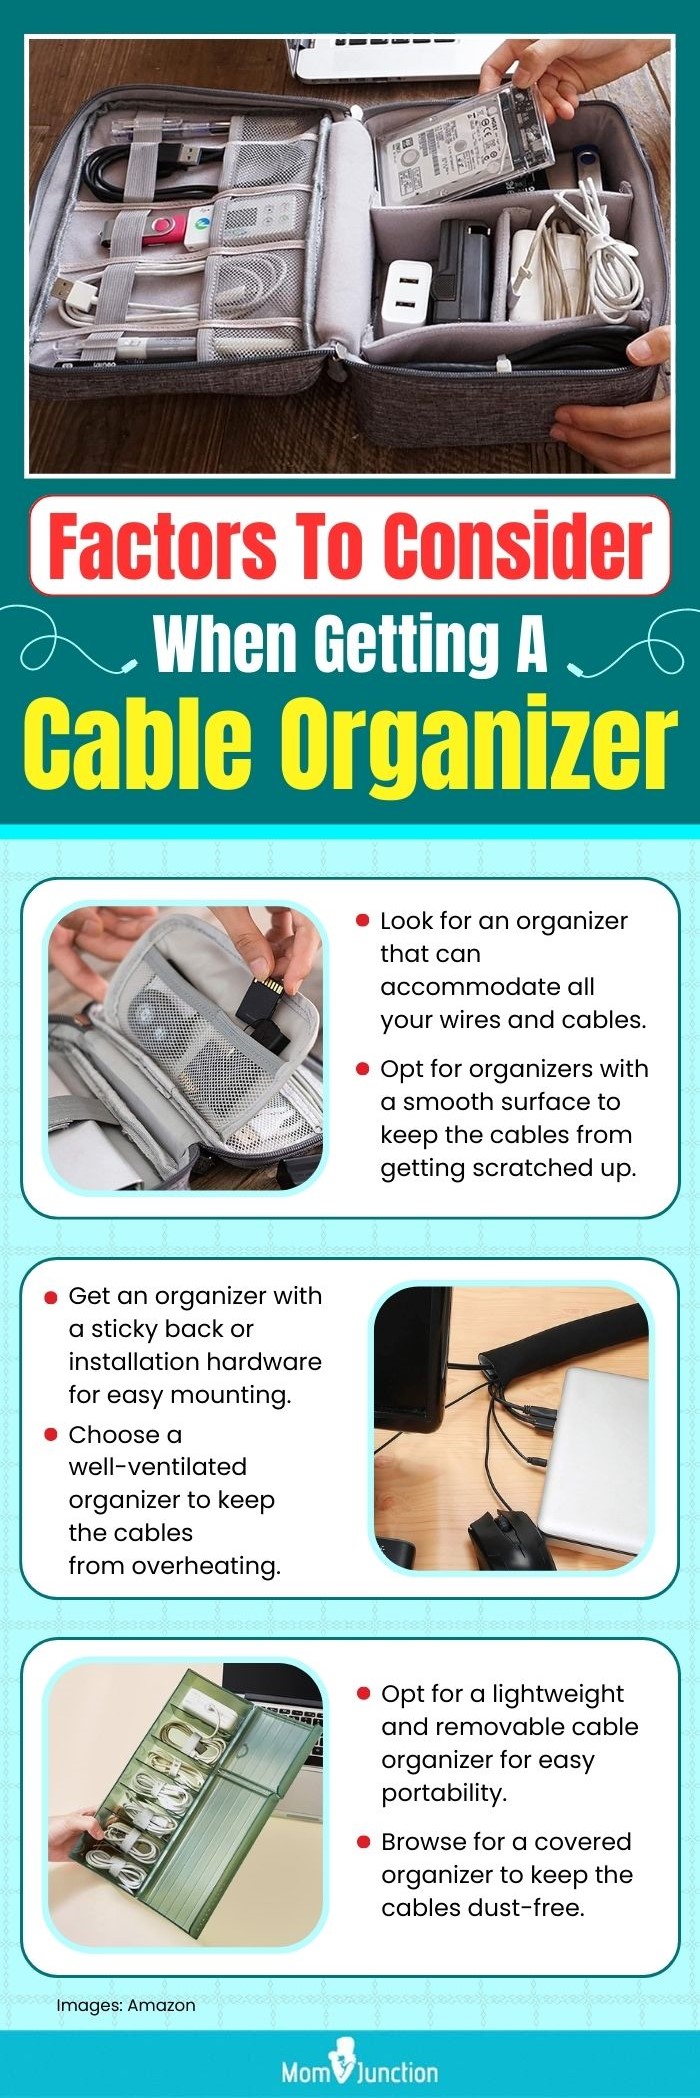 Cable Management Box - Hide Cords Home Organizer Tool, Power Strip Cover,  Baby Proof & Pets Electric Concealer - Wire Cord Outlet Surge Protector